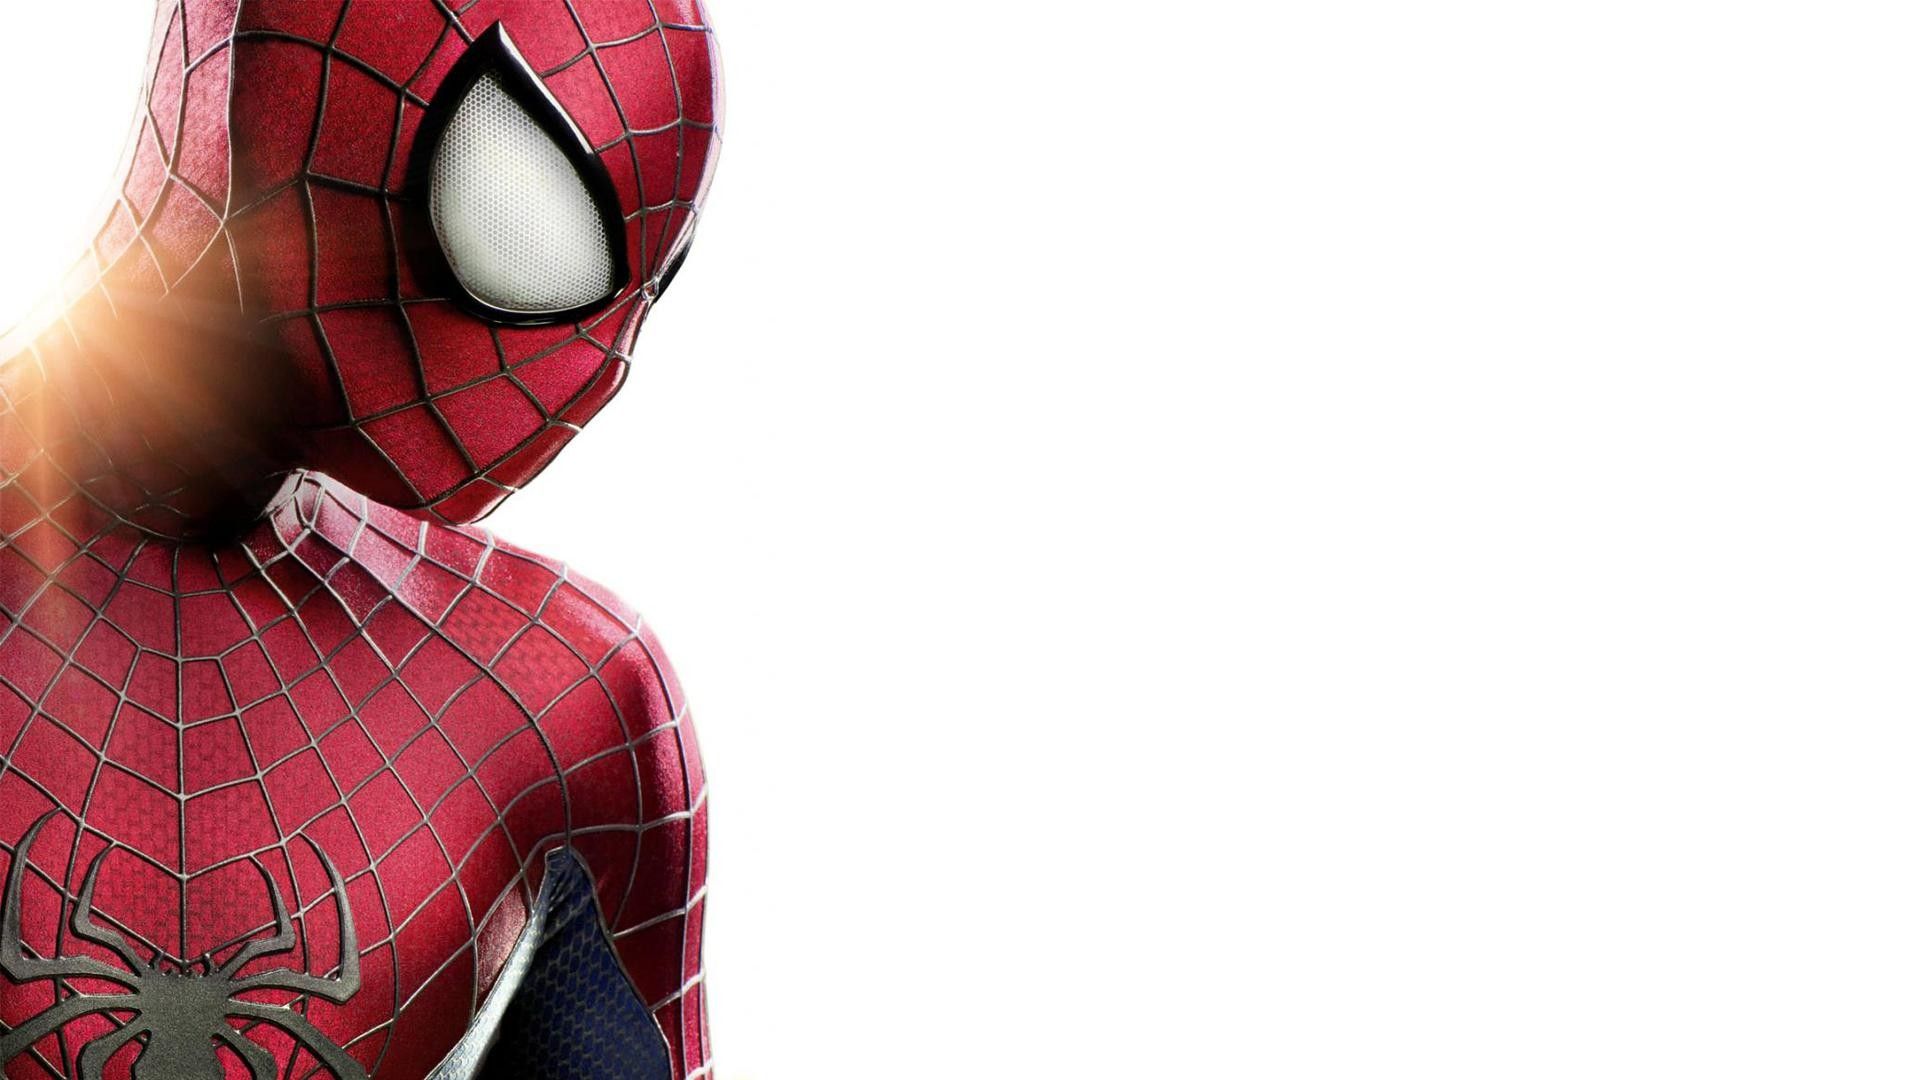 33 The Amazing Spider-Man 2 HD Wallpapers | Backgrounds ...